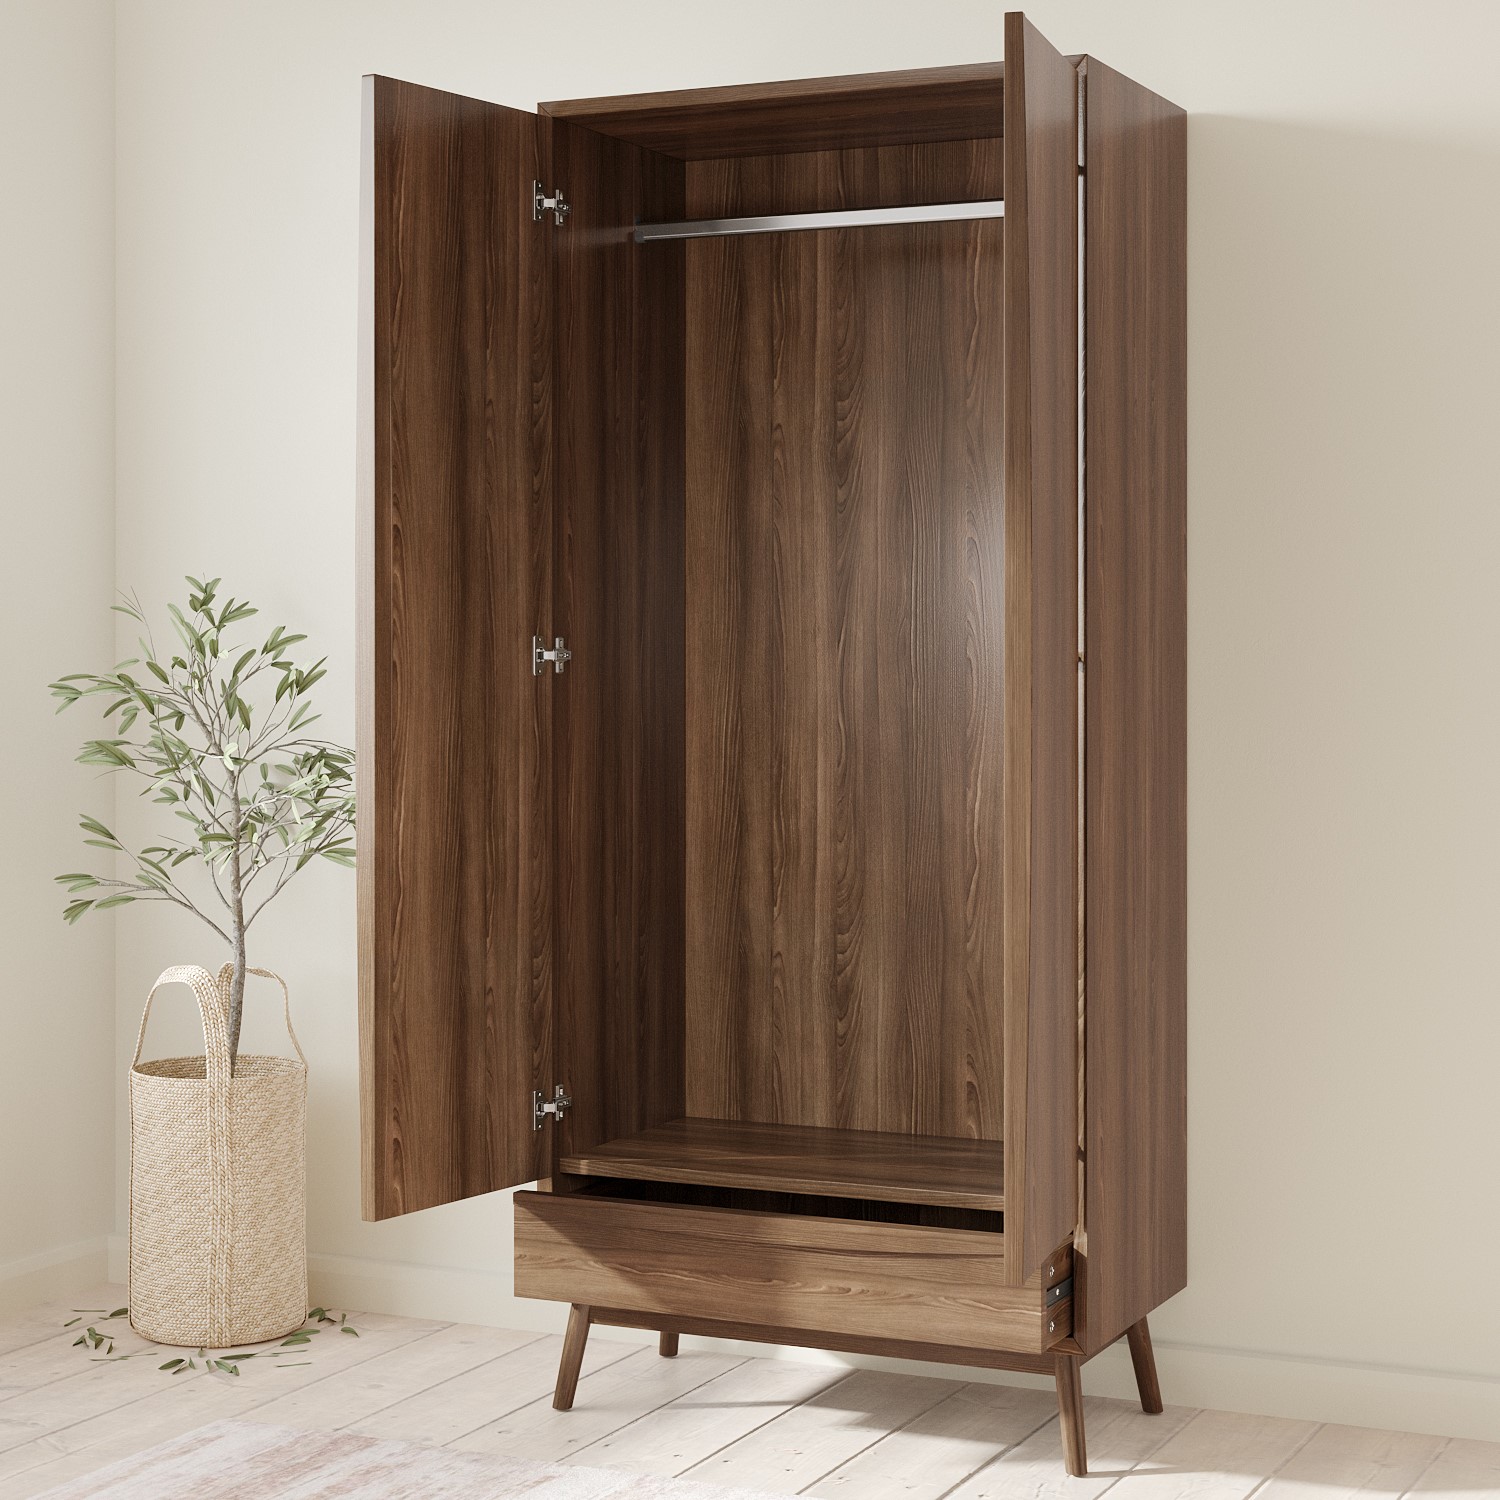 Read more about Walnut mid-century double wardrobe with drawer frances